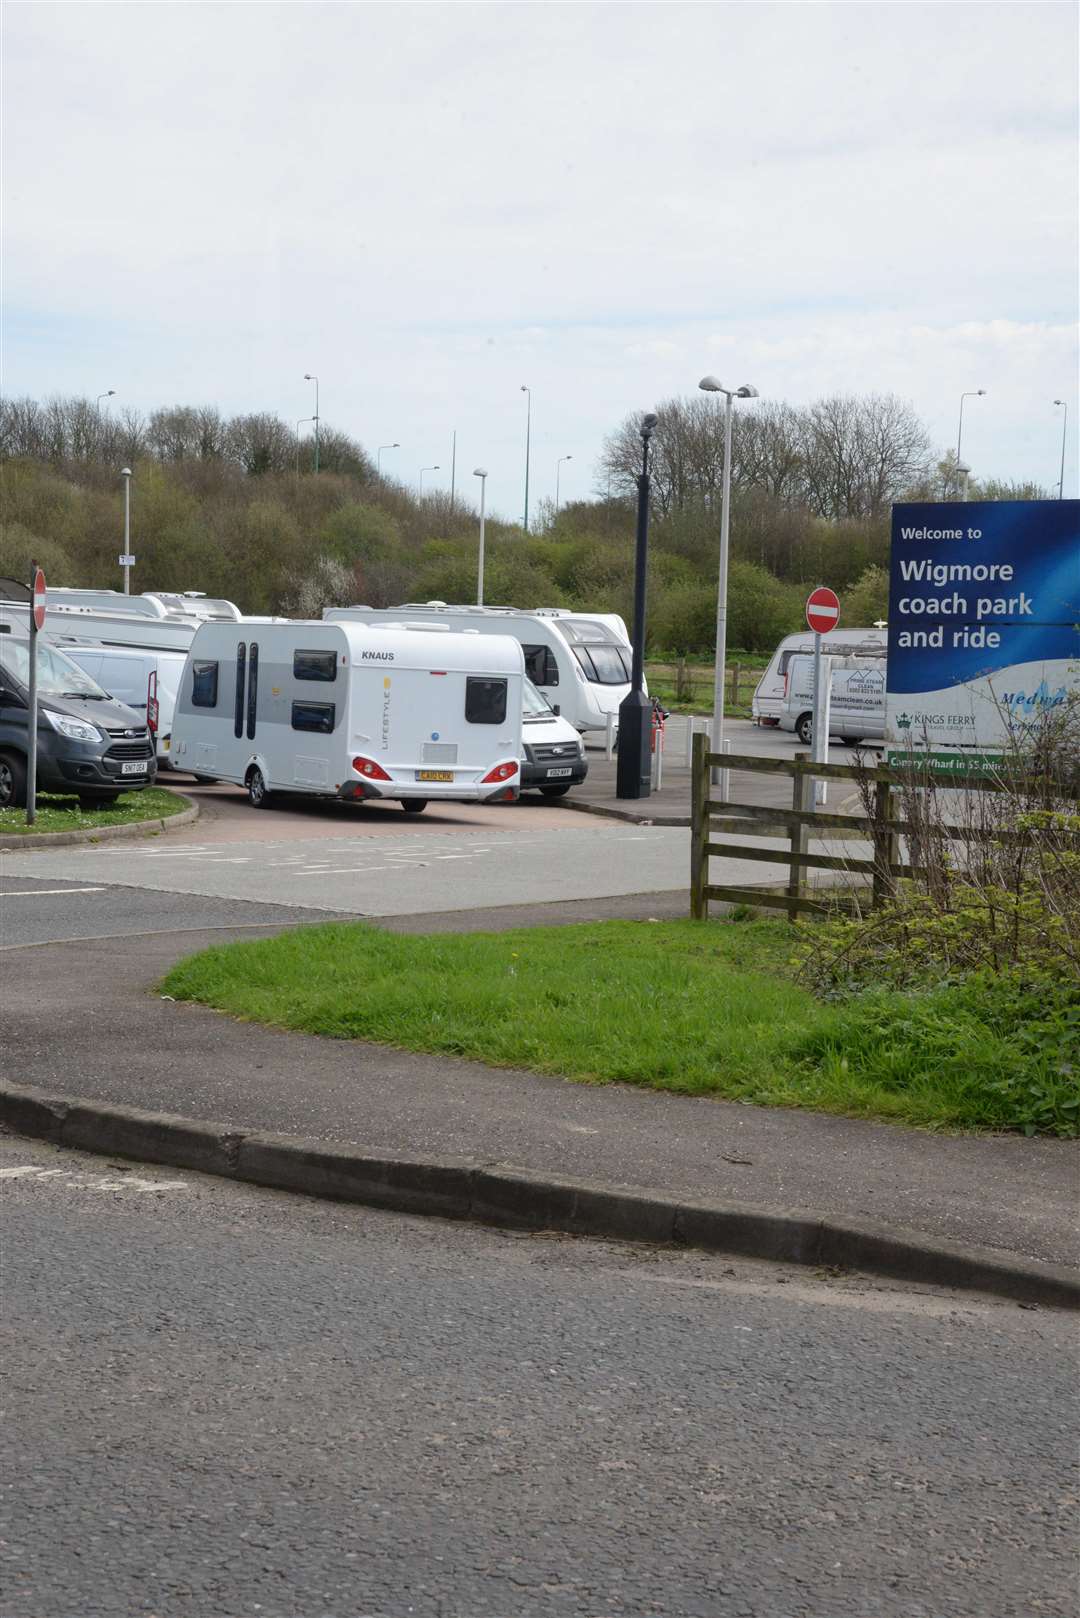 Travellers on the commuter car park in Wigmore.